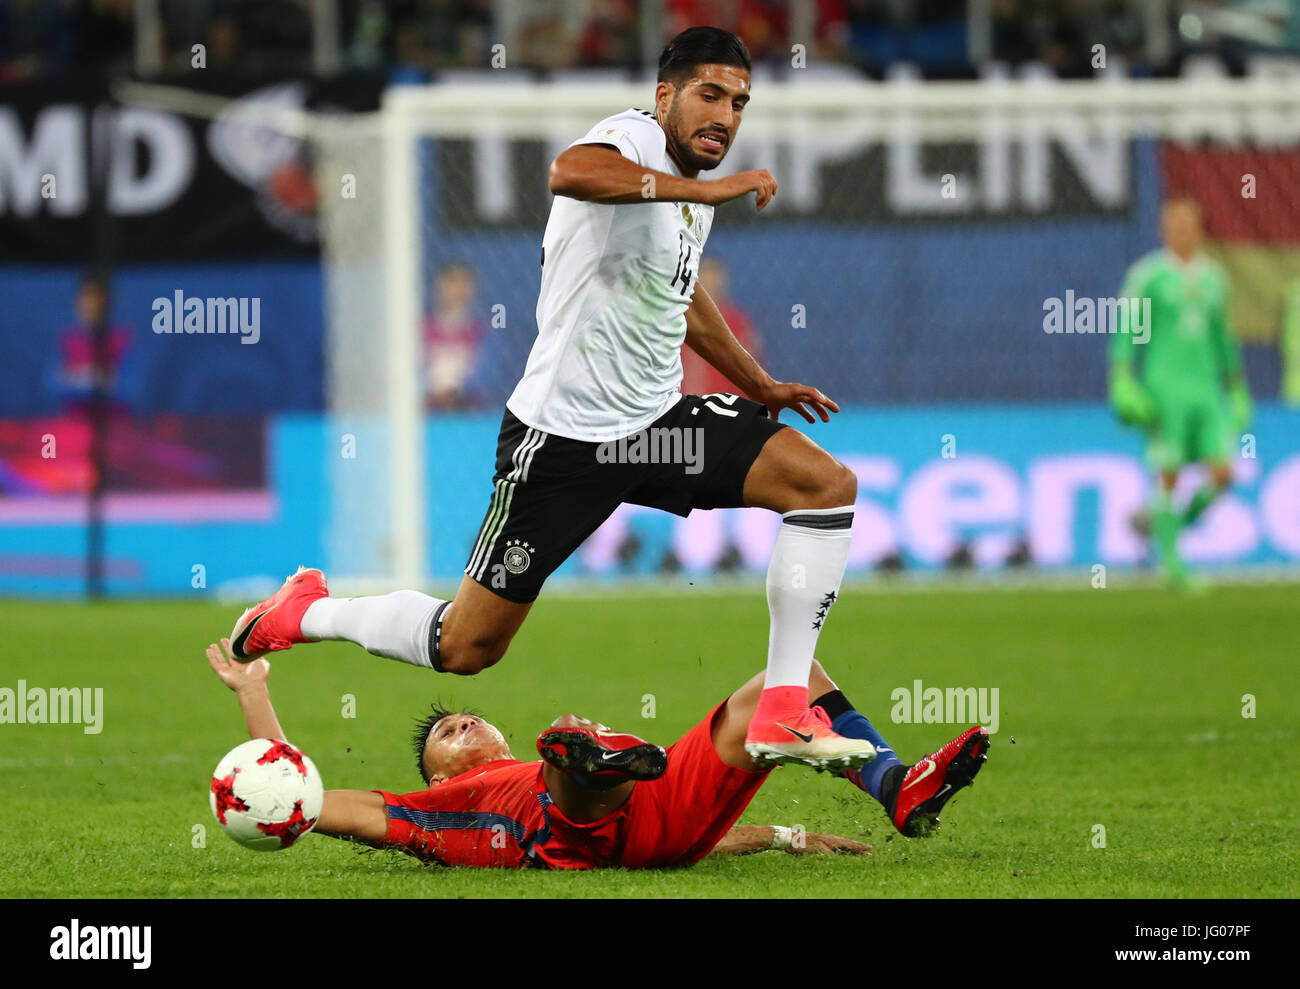 Saint Petersburg, Russia. 2nd July, 2017. Chile's Alexis Sanchez (M) and Germany's Emre Can vie for the ball during the Confederations Cup finale between Chile and Germany at the Saint Petersburg Stadium in Saint Petersburg, Russia, 2 July 2017. Photo: Christian Charisius/dpa/Alamy Live News Stock Photo